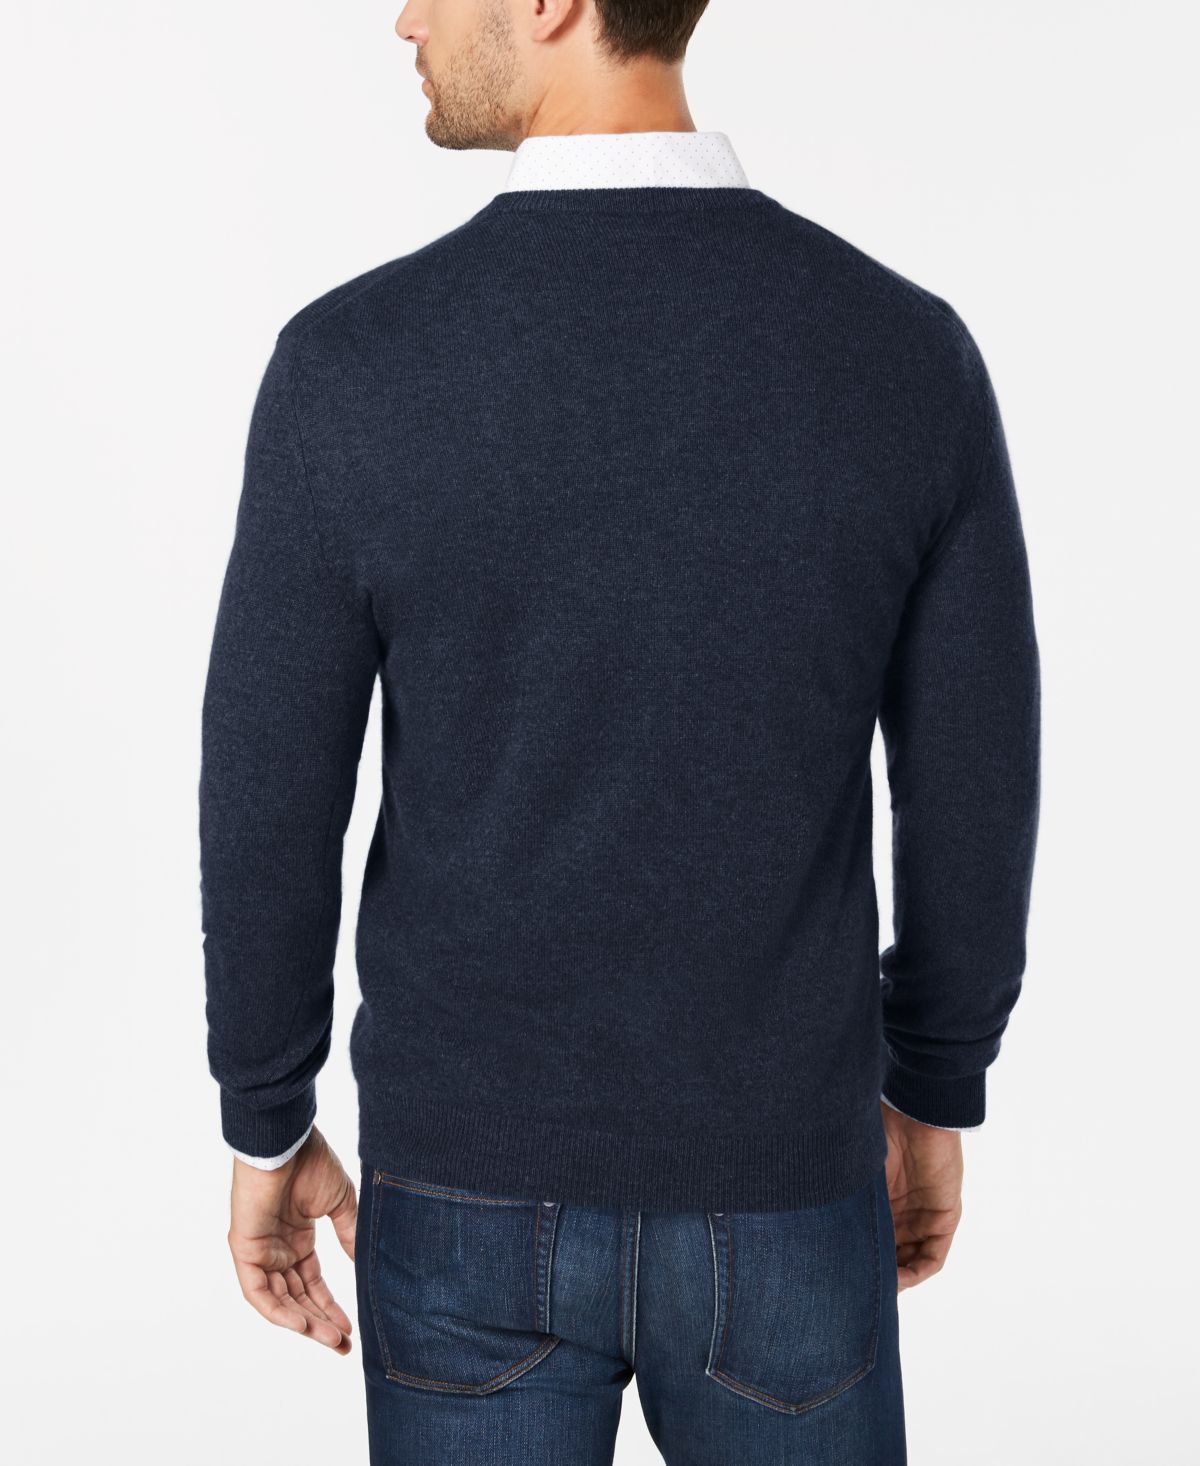 Club Room Mens Cashmere Crew-Neck Sweater,Navy Heather,X-Large